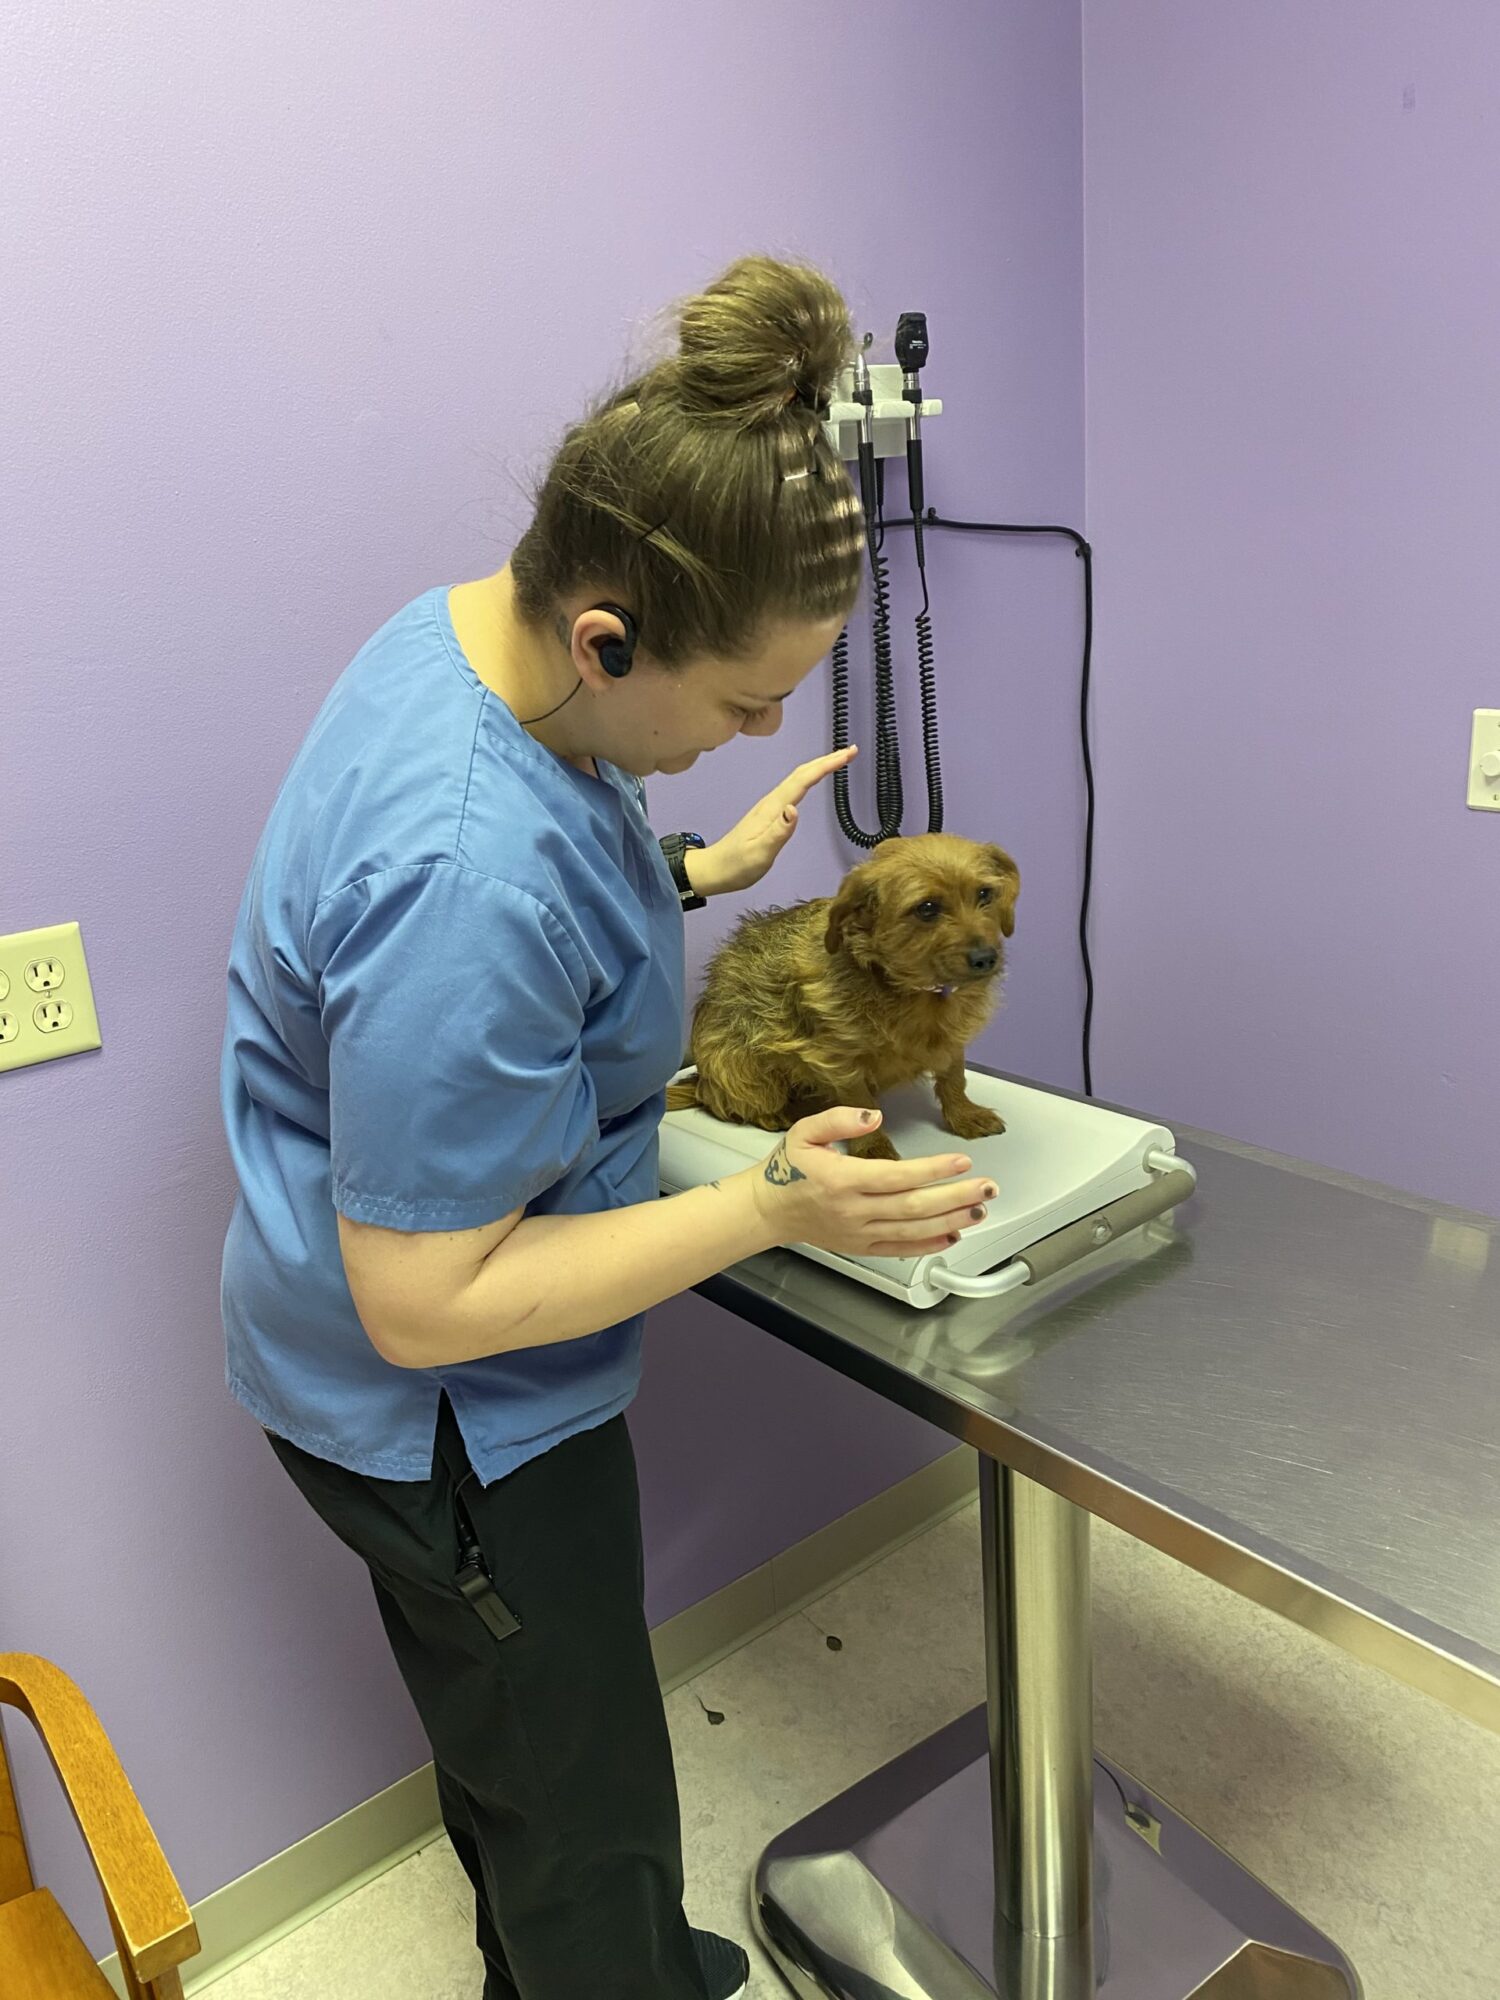 First, our technicians will place your pet on the scale to get an accurate weight.